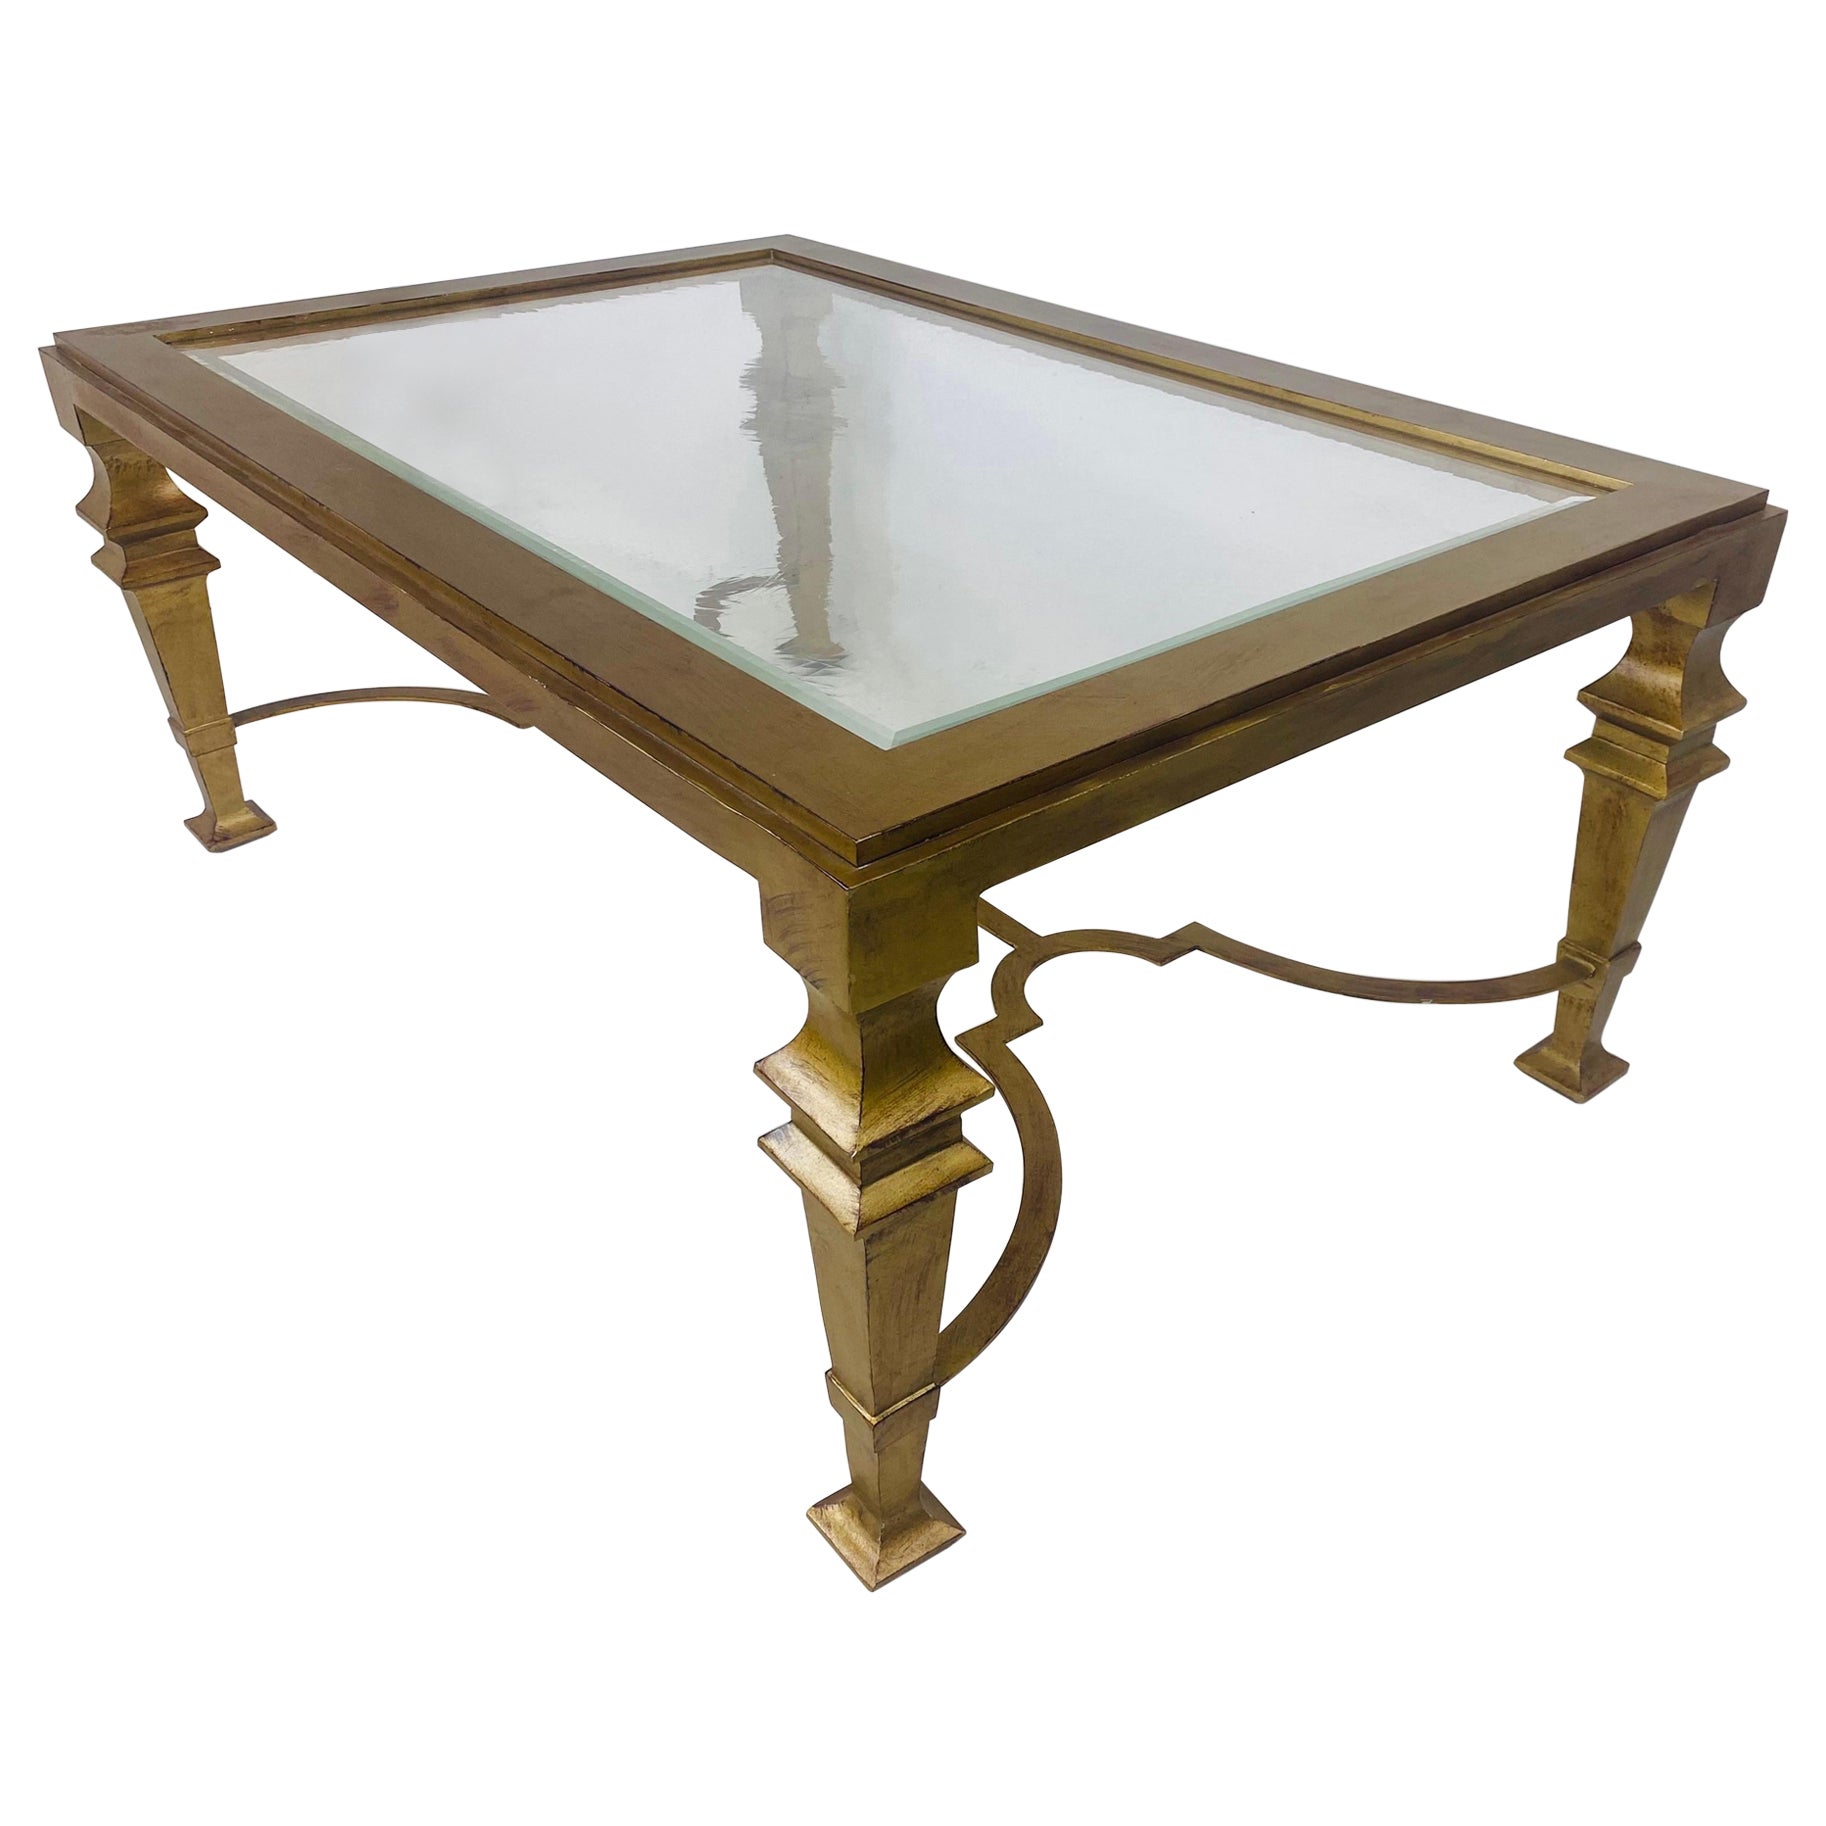 Vintage large gilded wrought iron Georgian style coffee table